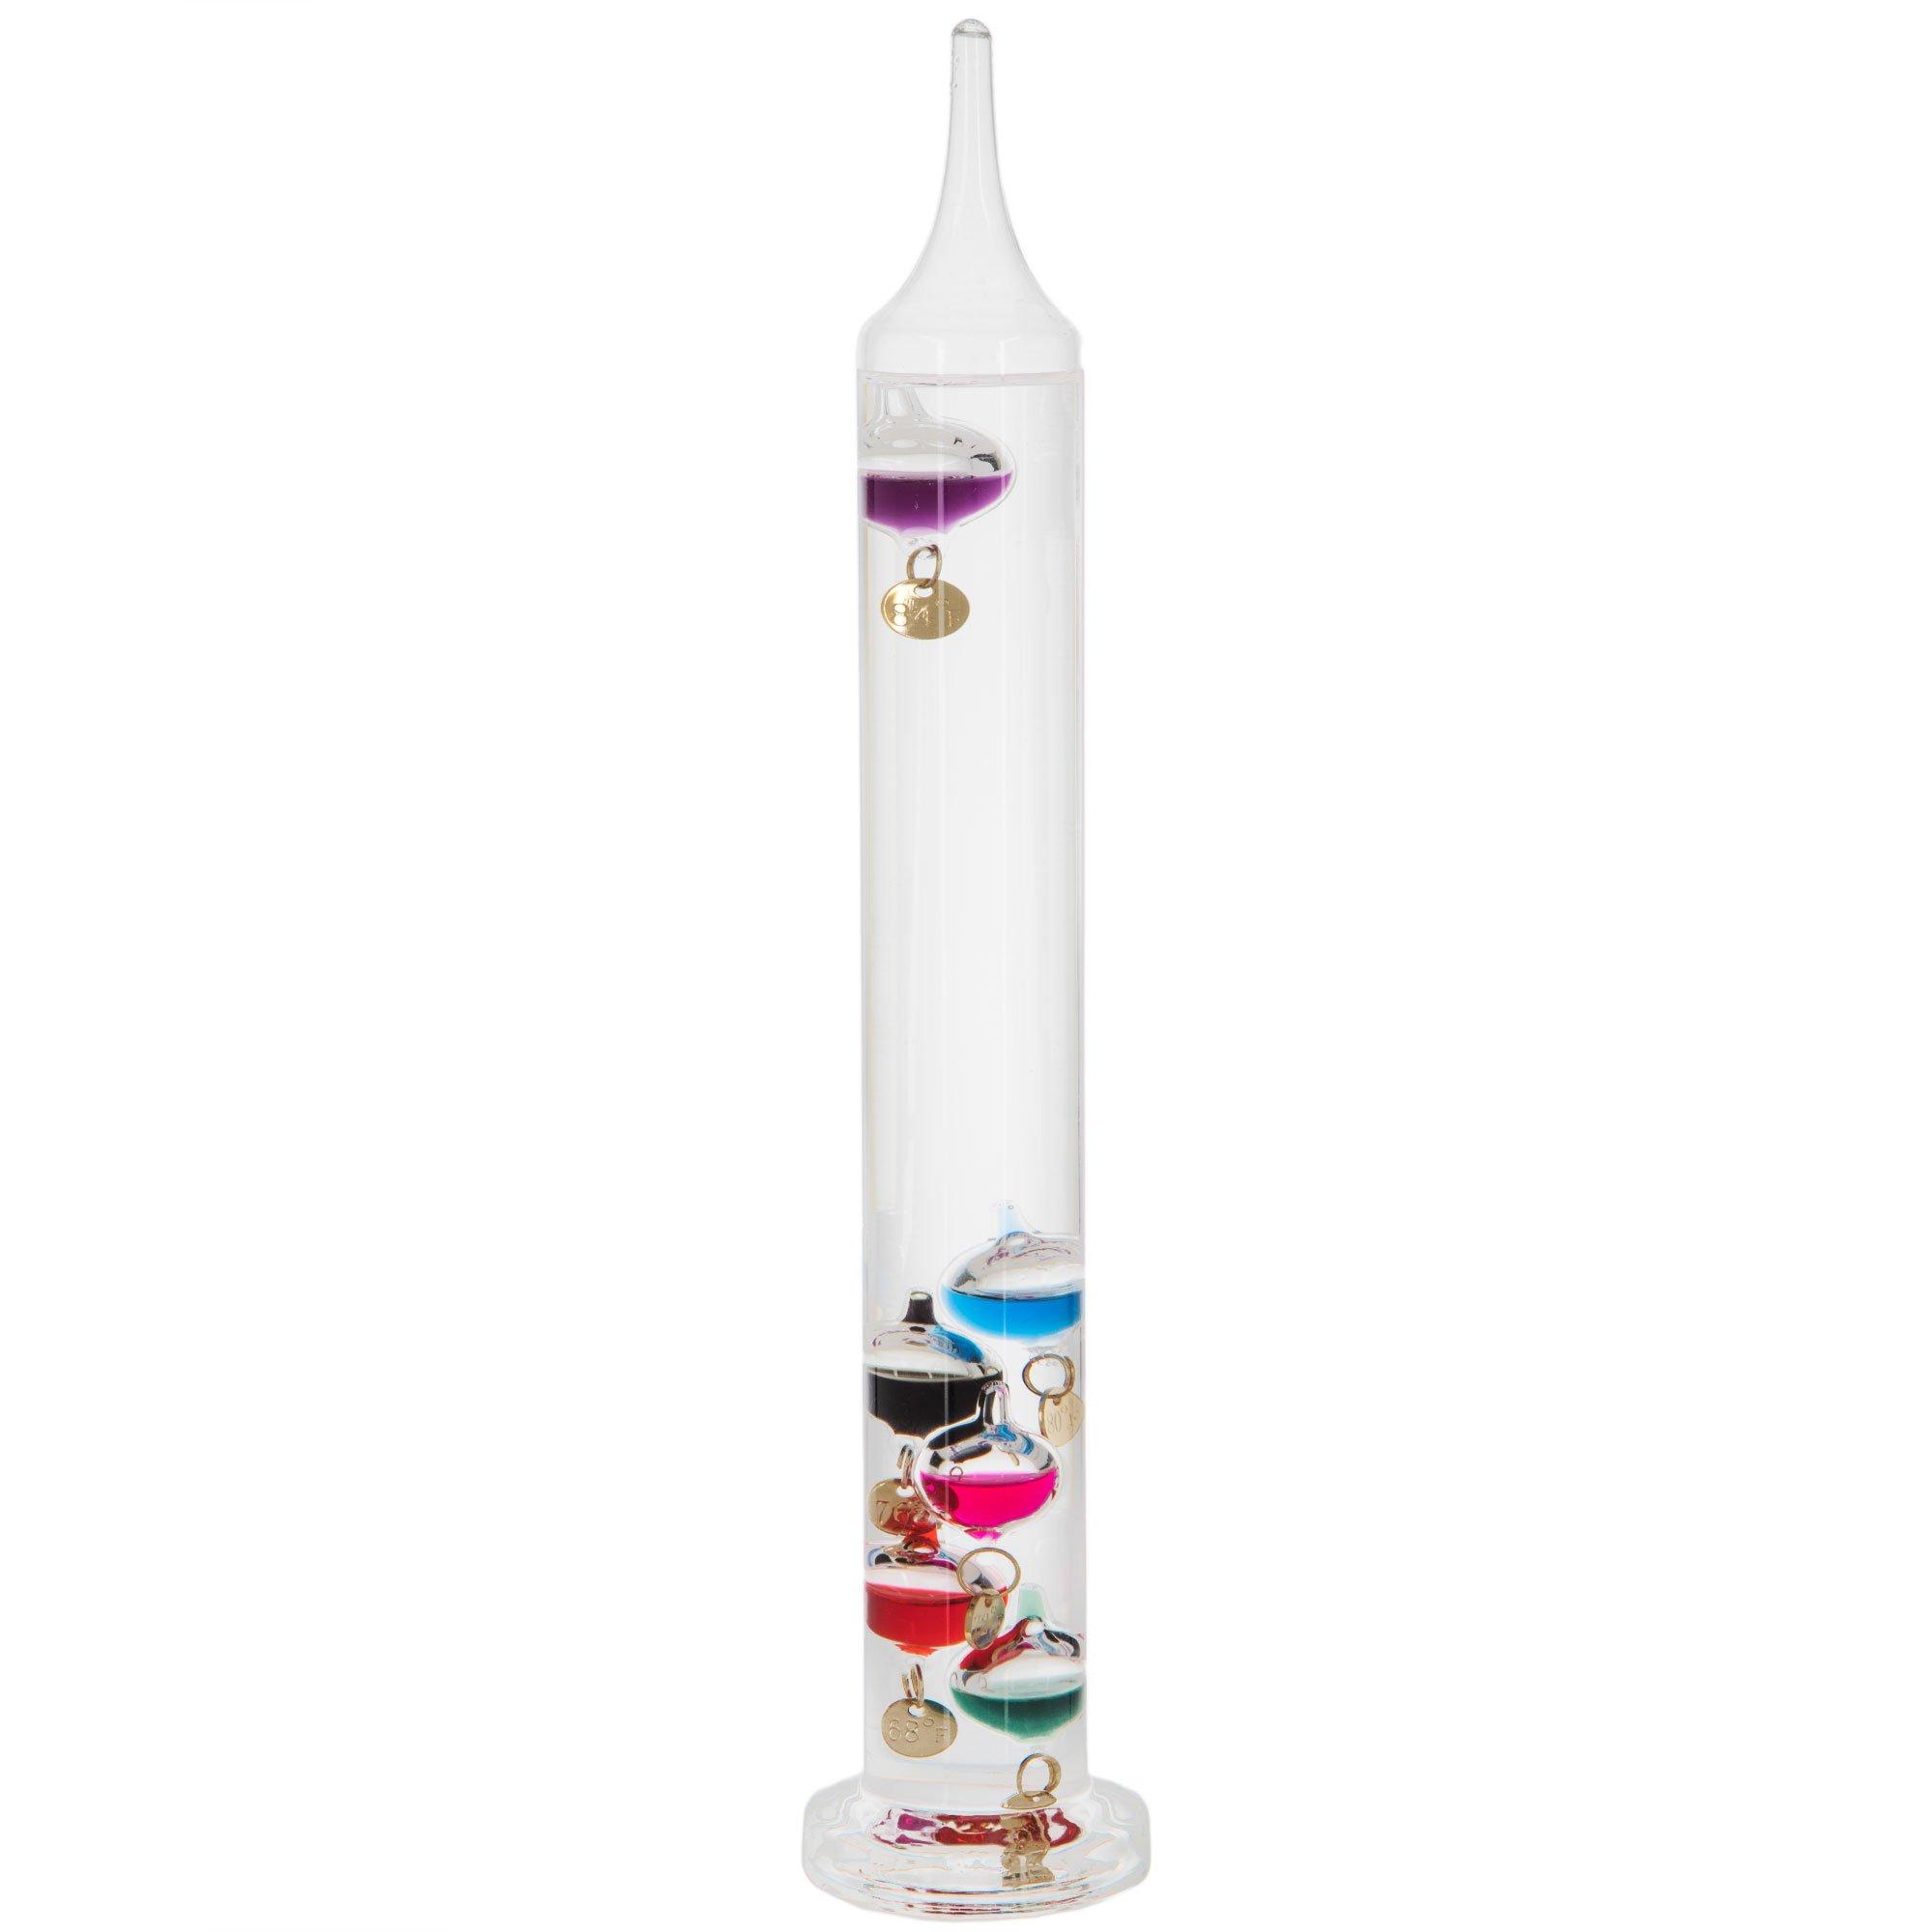 Shop LC Galileo Thermometer Indoor and Outdoor Temperature with